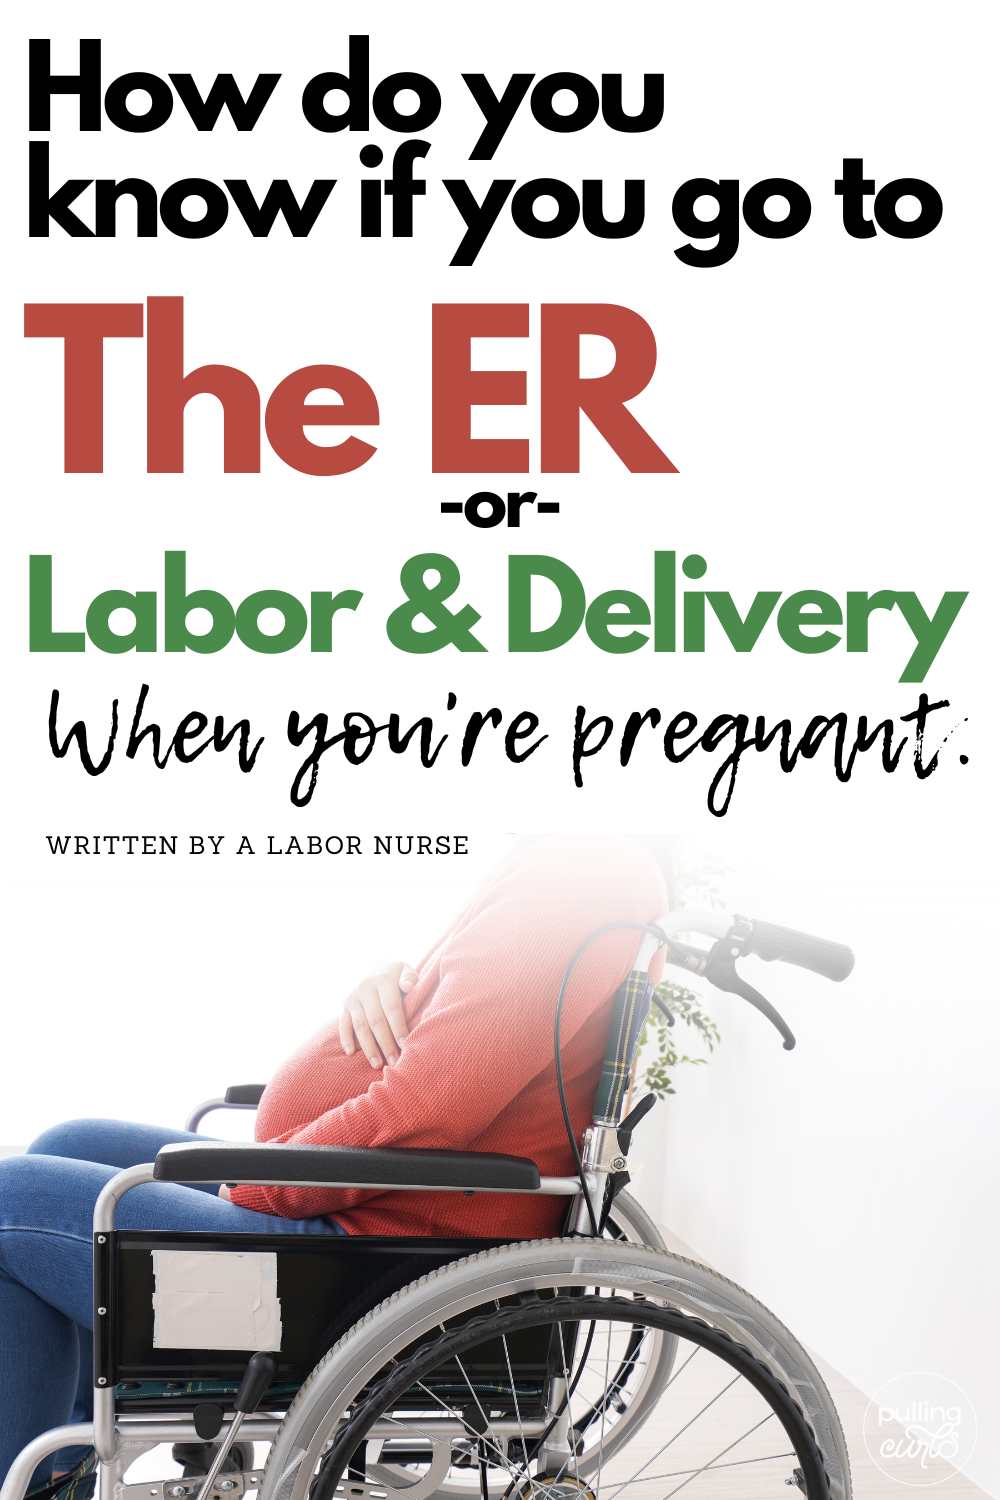 Discover insights on when to visit Labor and Delivery instead of ER during pregnancy. This pin provides valuable information to guide mothers-to-be through an essential decision during the later stages of pregnancy. It sheds light on the signs indicating it's time to head to the Labor and Delivery. Stay informed, prepared, and at ease during this crucial phase. via @pullingcurls